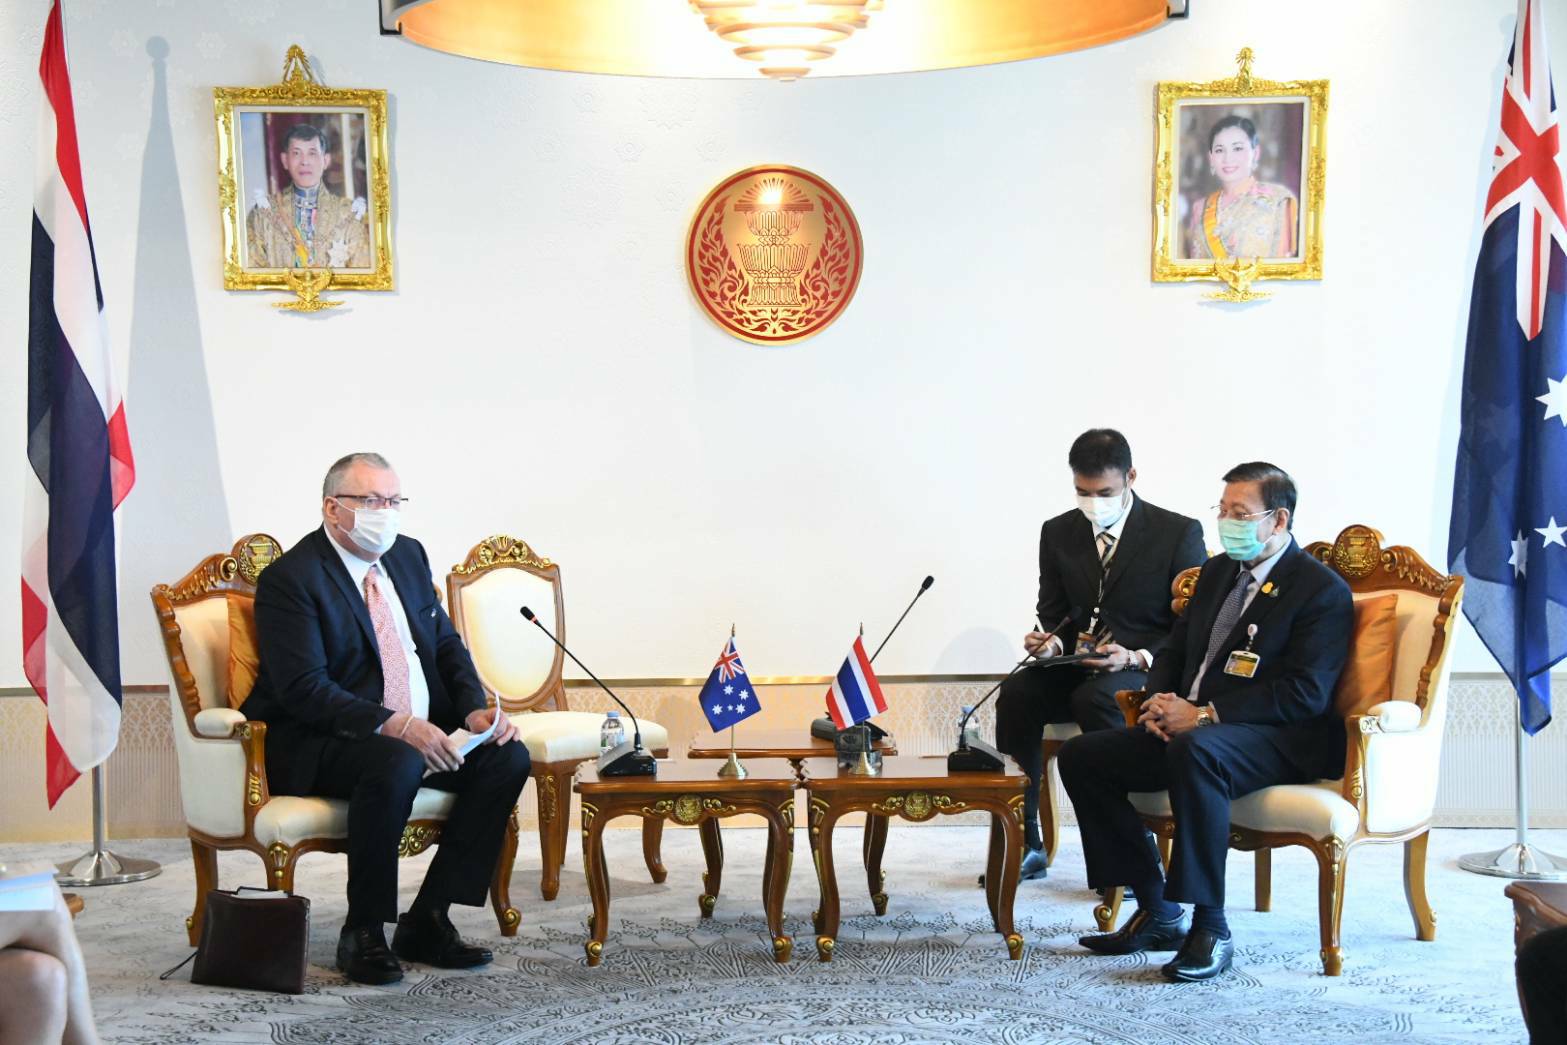 The President of the Senate Welcomed the Ambassador of Australia to Thailand To Bid Farewell on the Occasion of the Completion of His Term (20 May 2022)